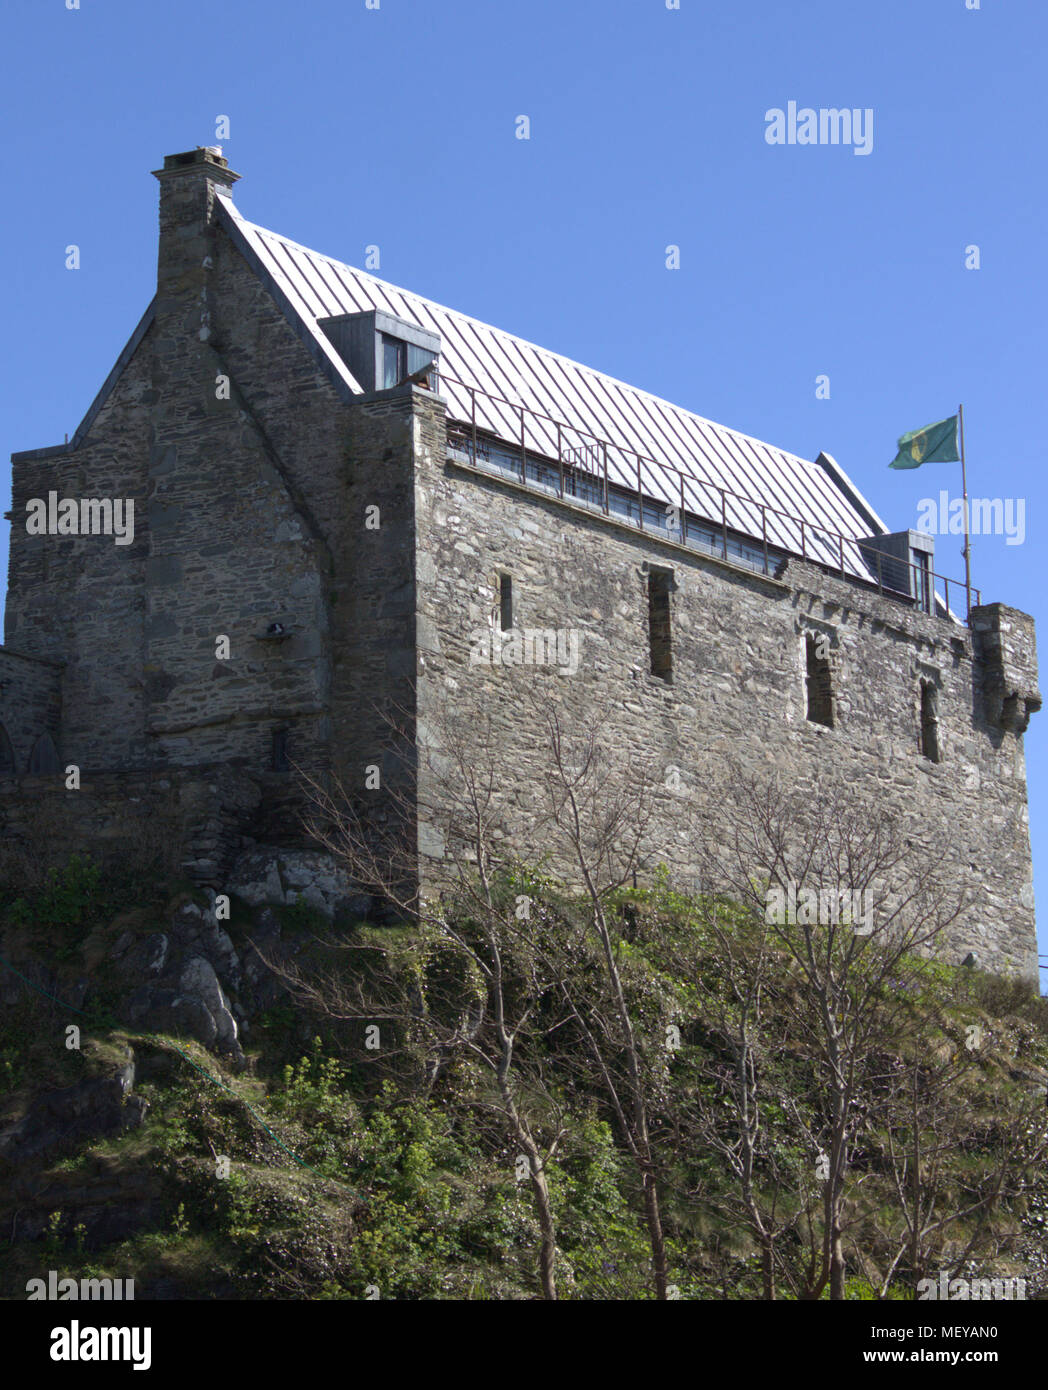 the walls and ramparts of Dun na Sead castle in baltimore, ireland. An irish castle built in 1215. A popular tourist and holiday destination. Stock Photo